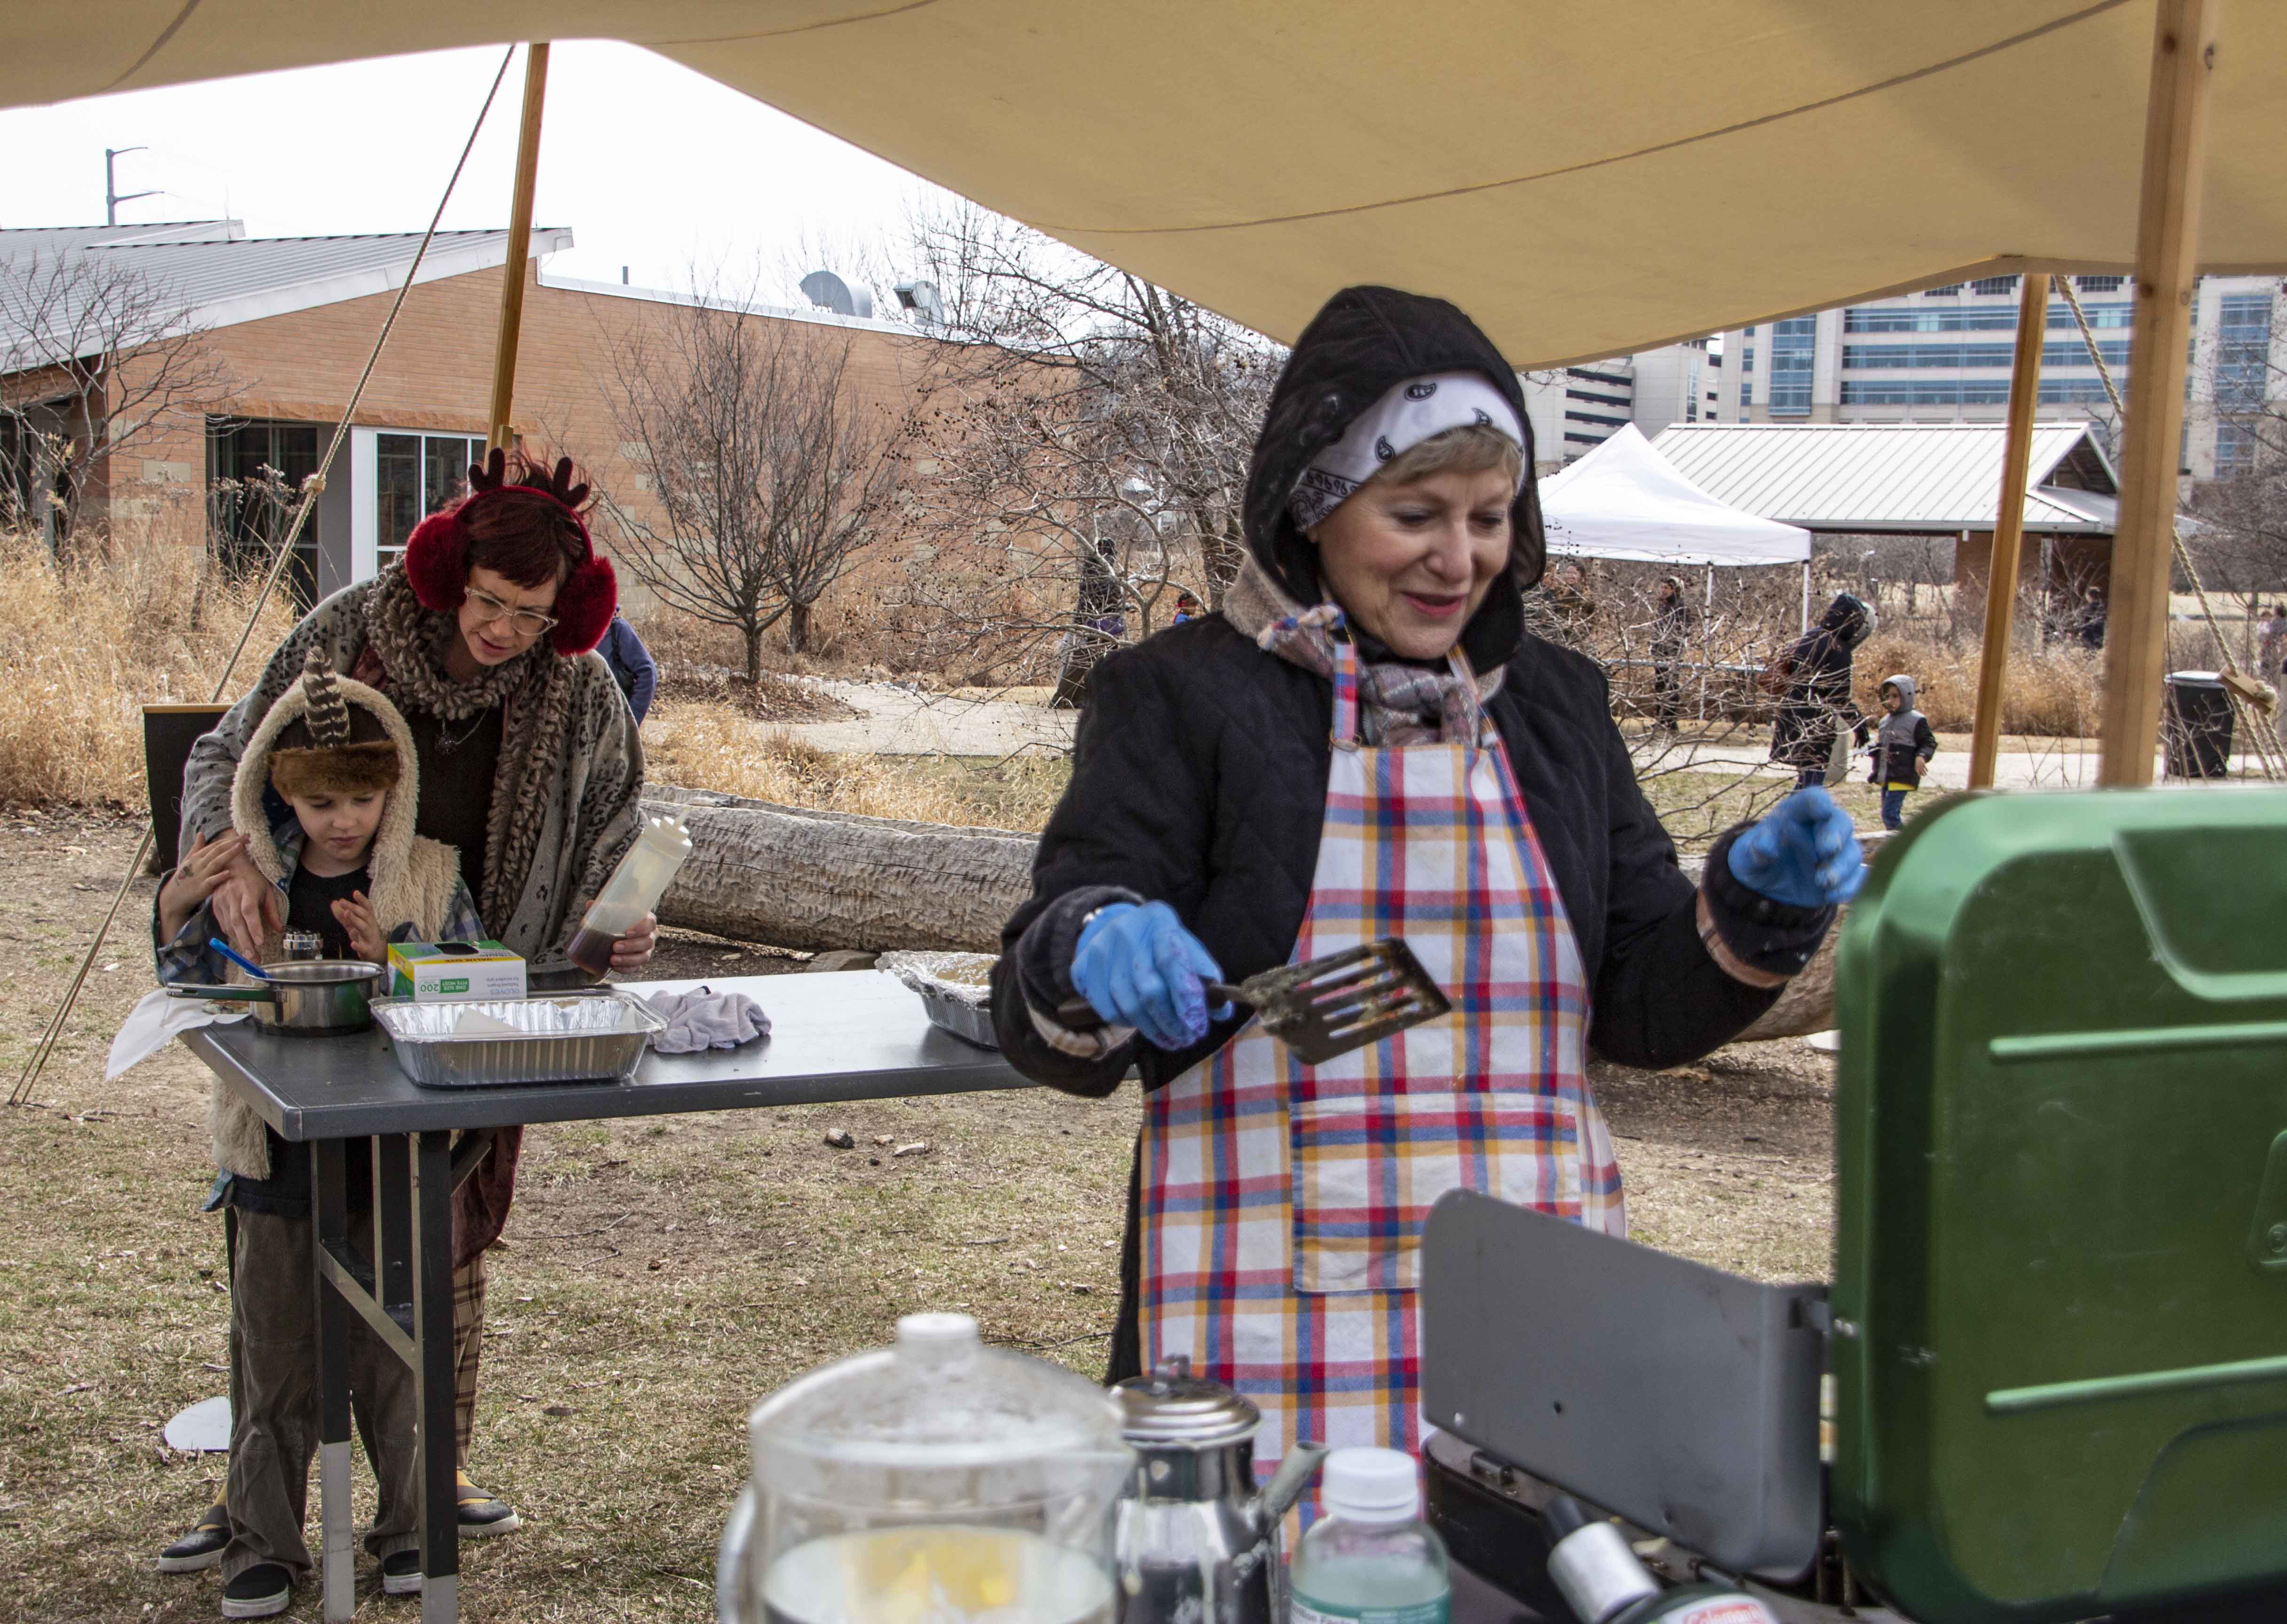 Volunteer Carol Smith cooking pancakes at an Urban Woodsman event last February at the Discovery Center in Kansas City.